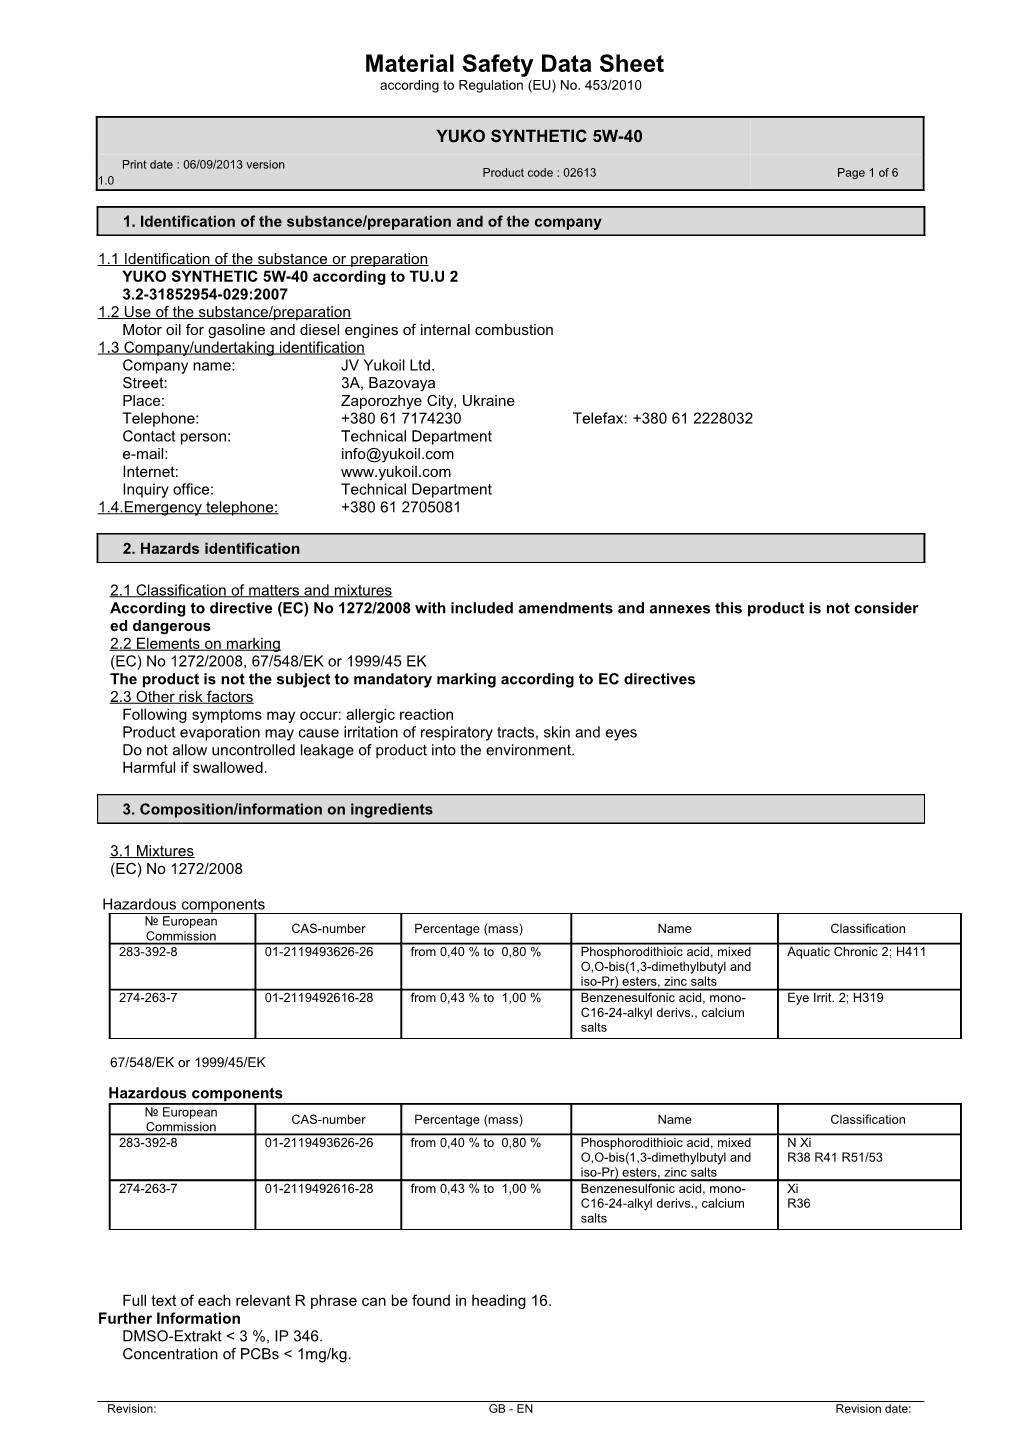 Material Safety Data Sheet s58